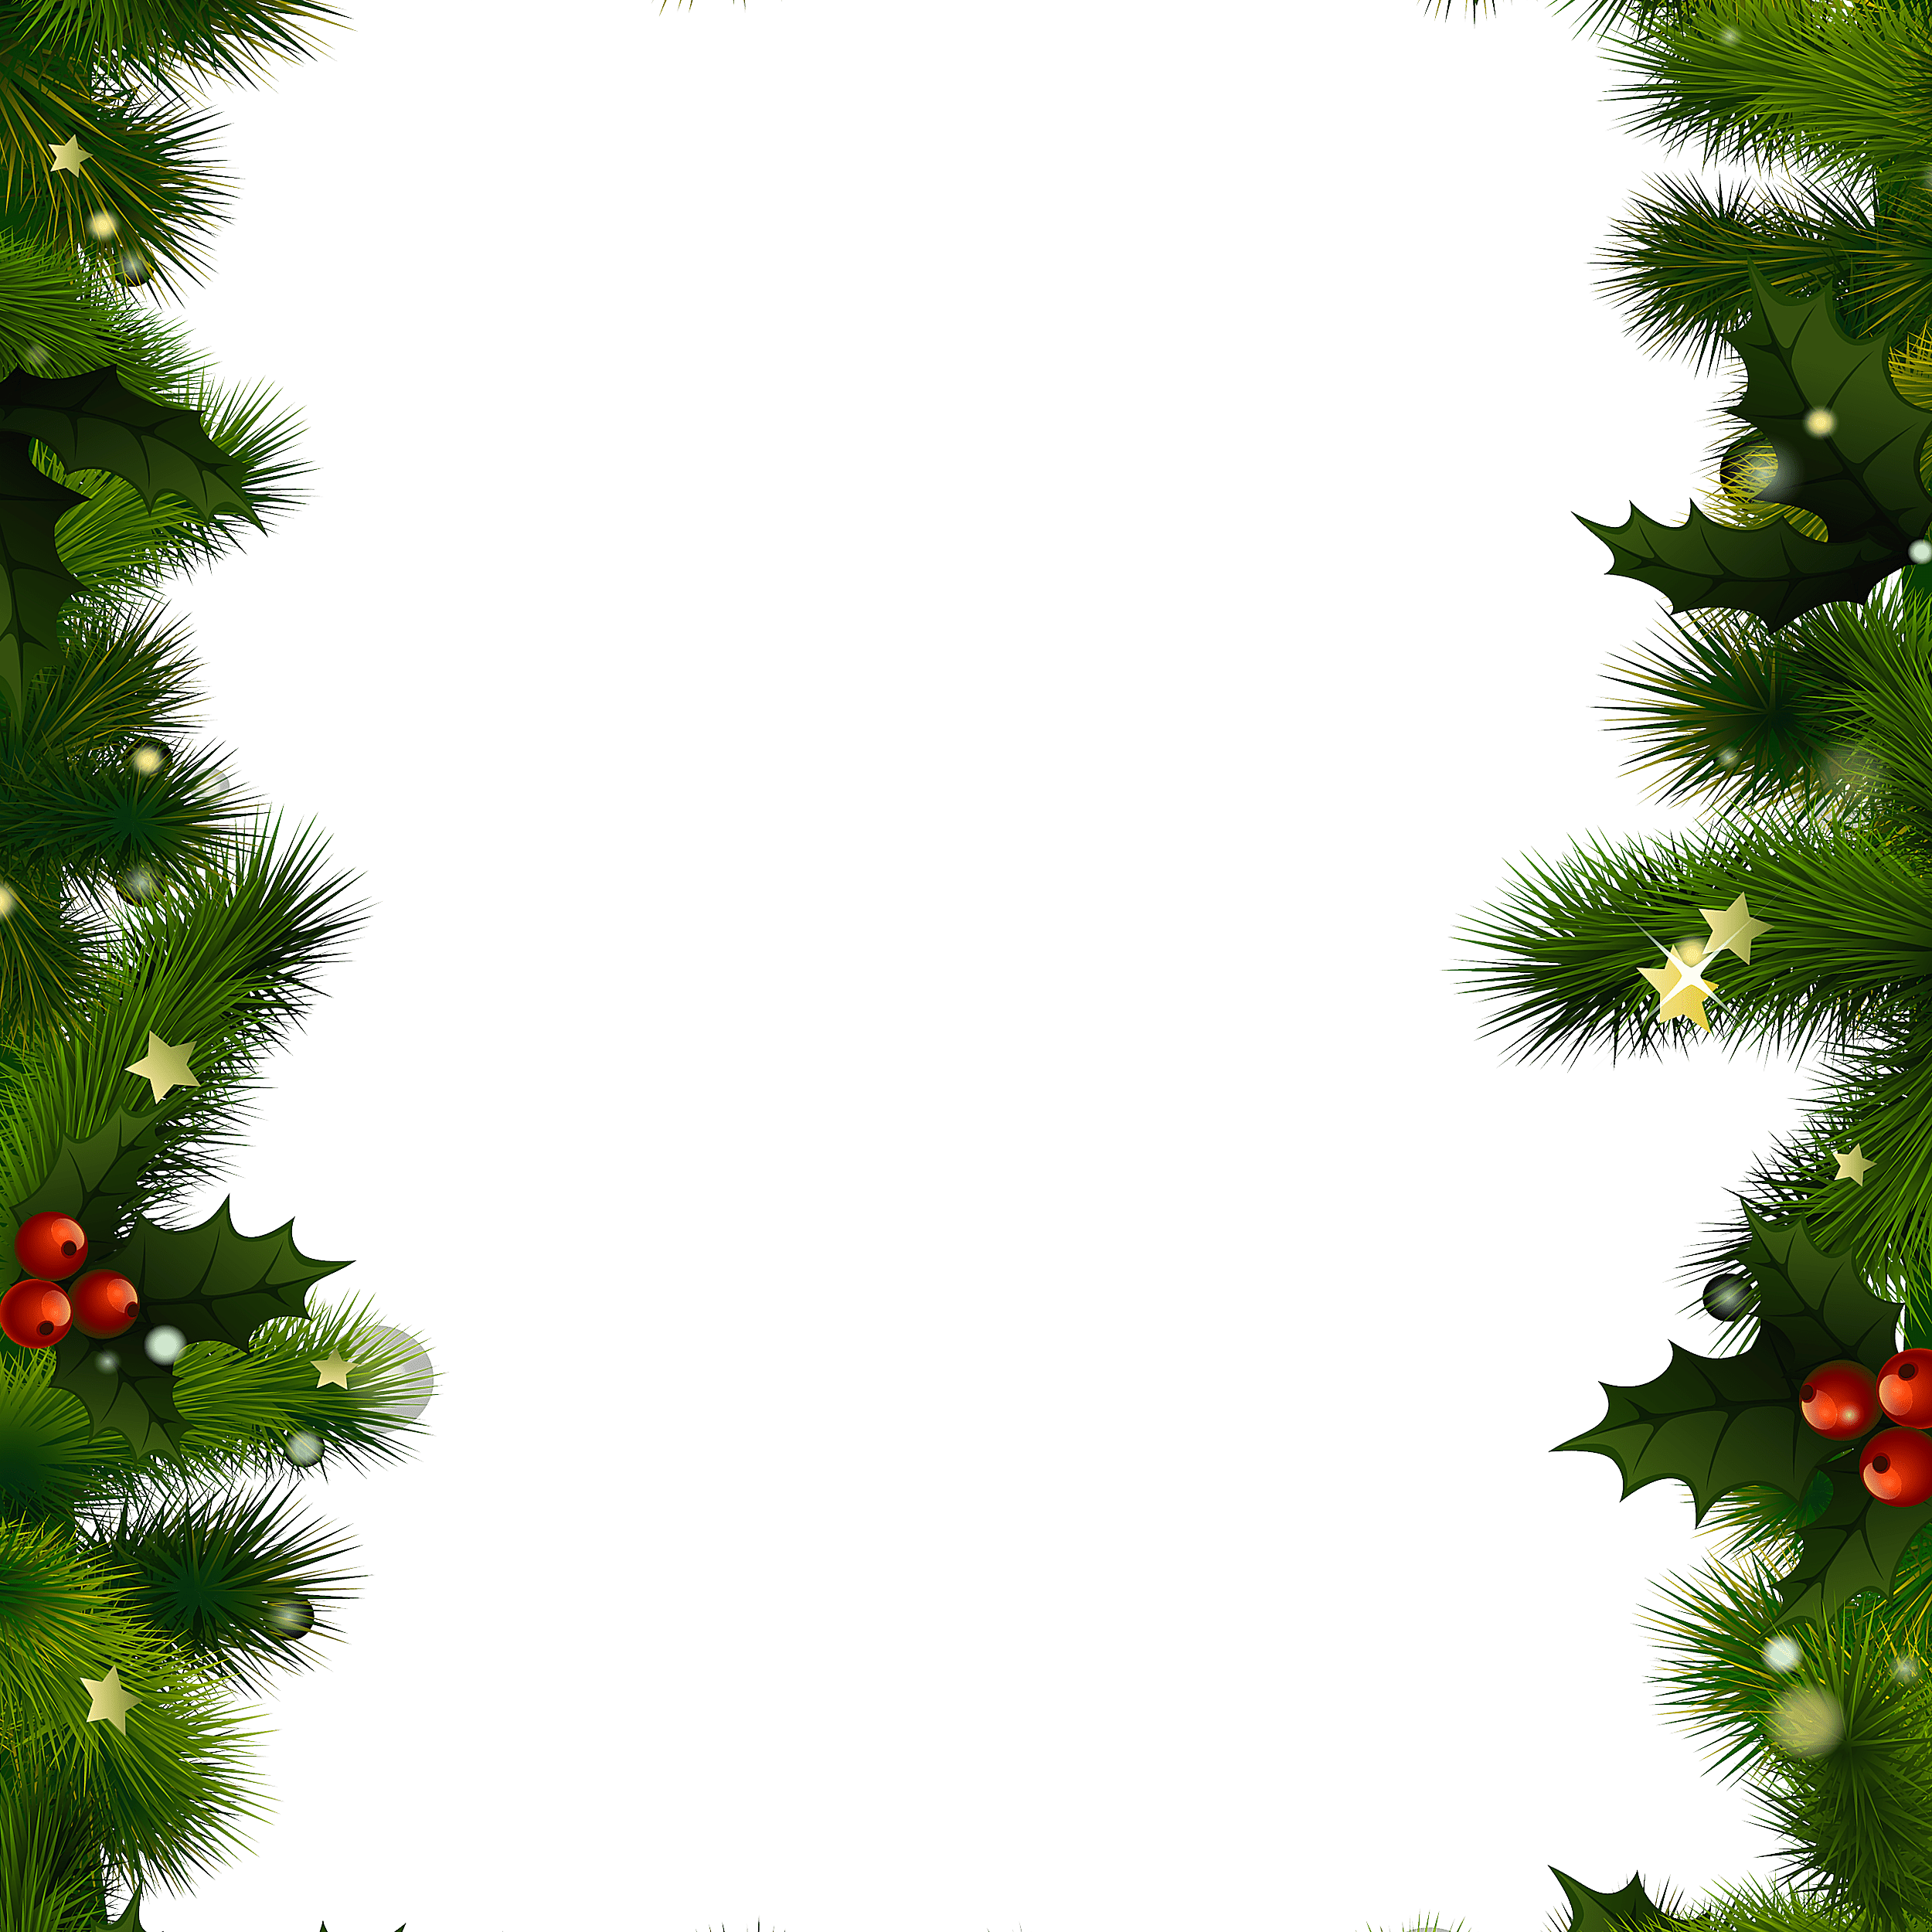 Images Christmas Powerpoint Free Transparent Image HD PNG Image